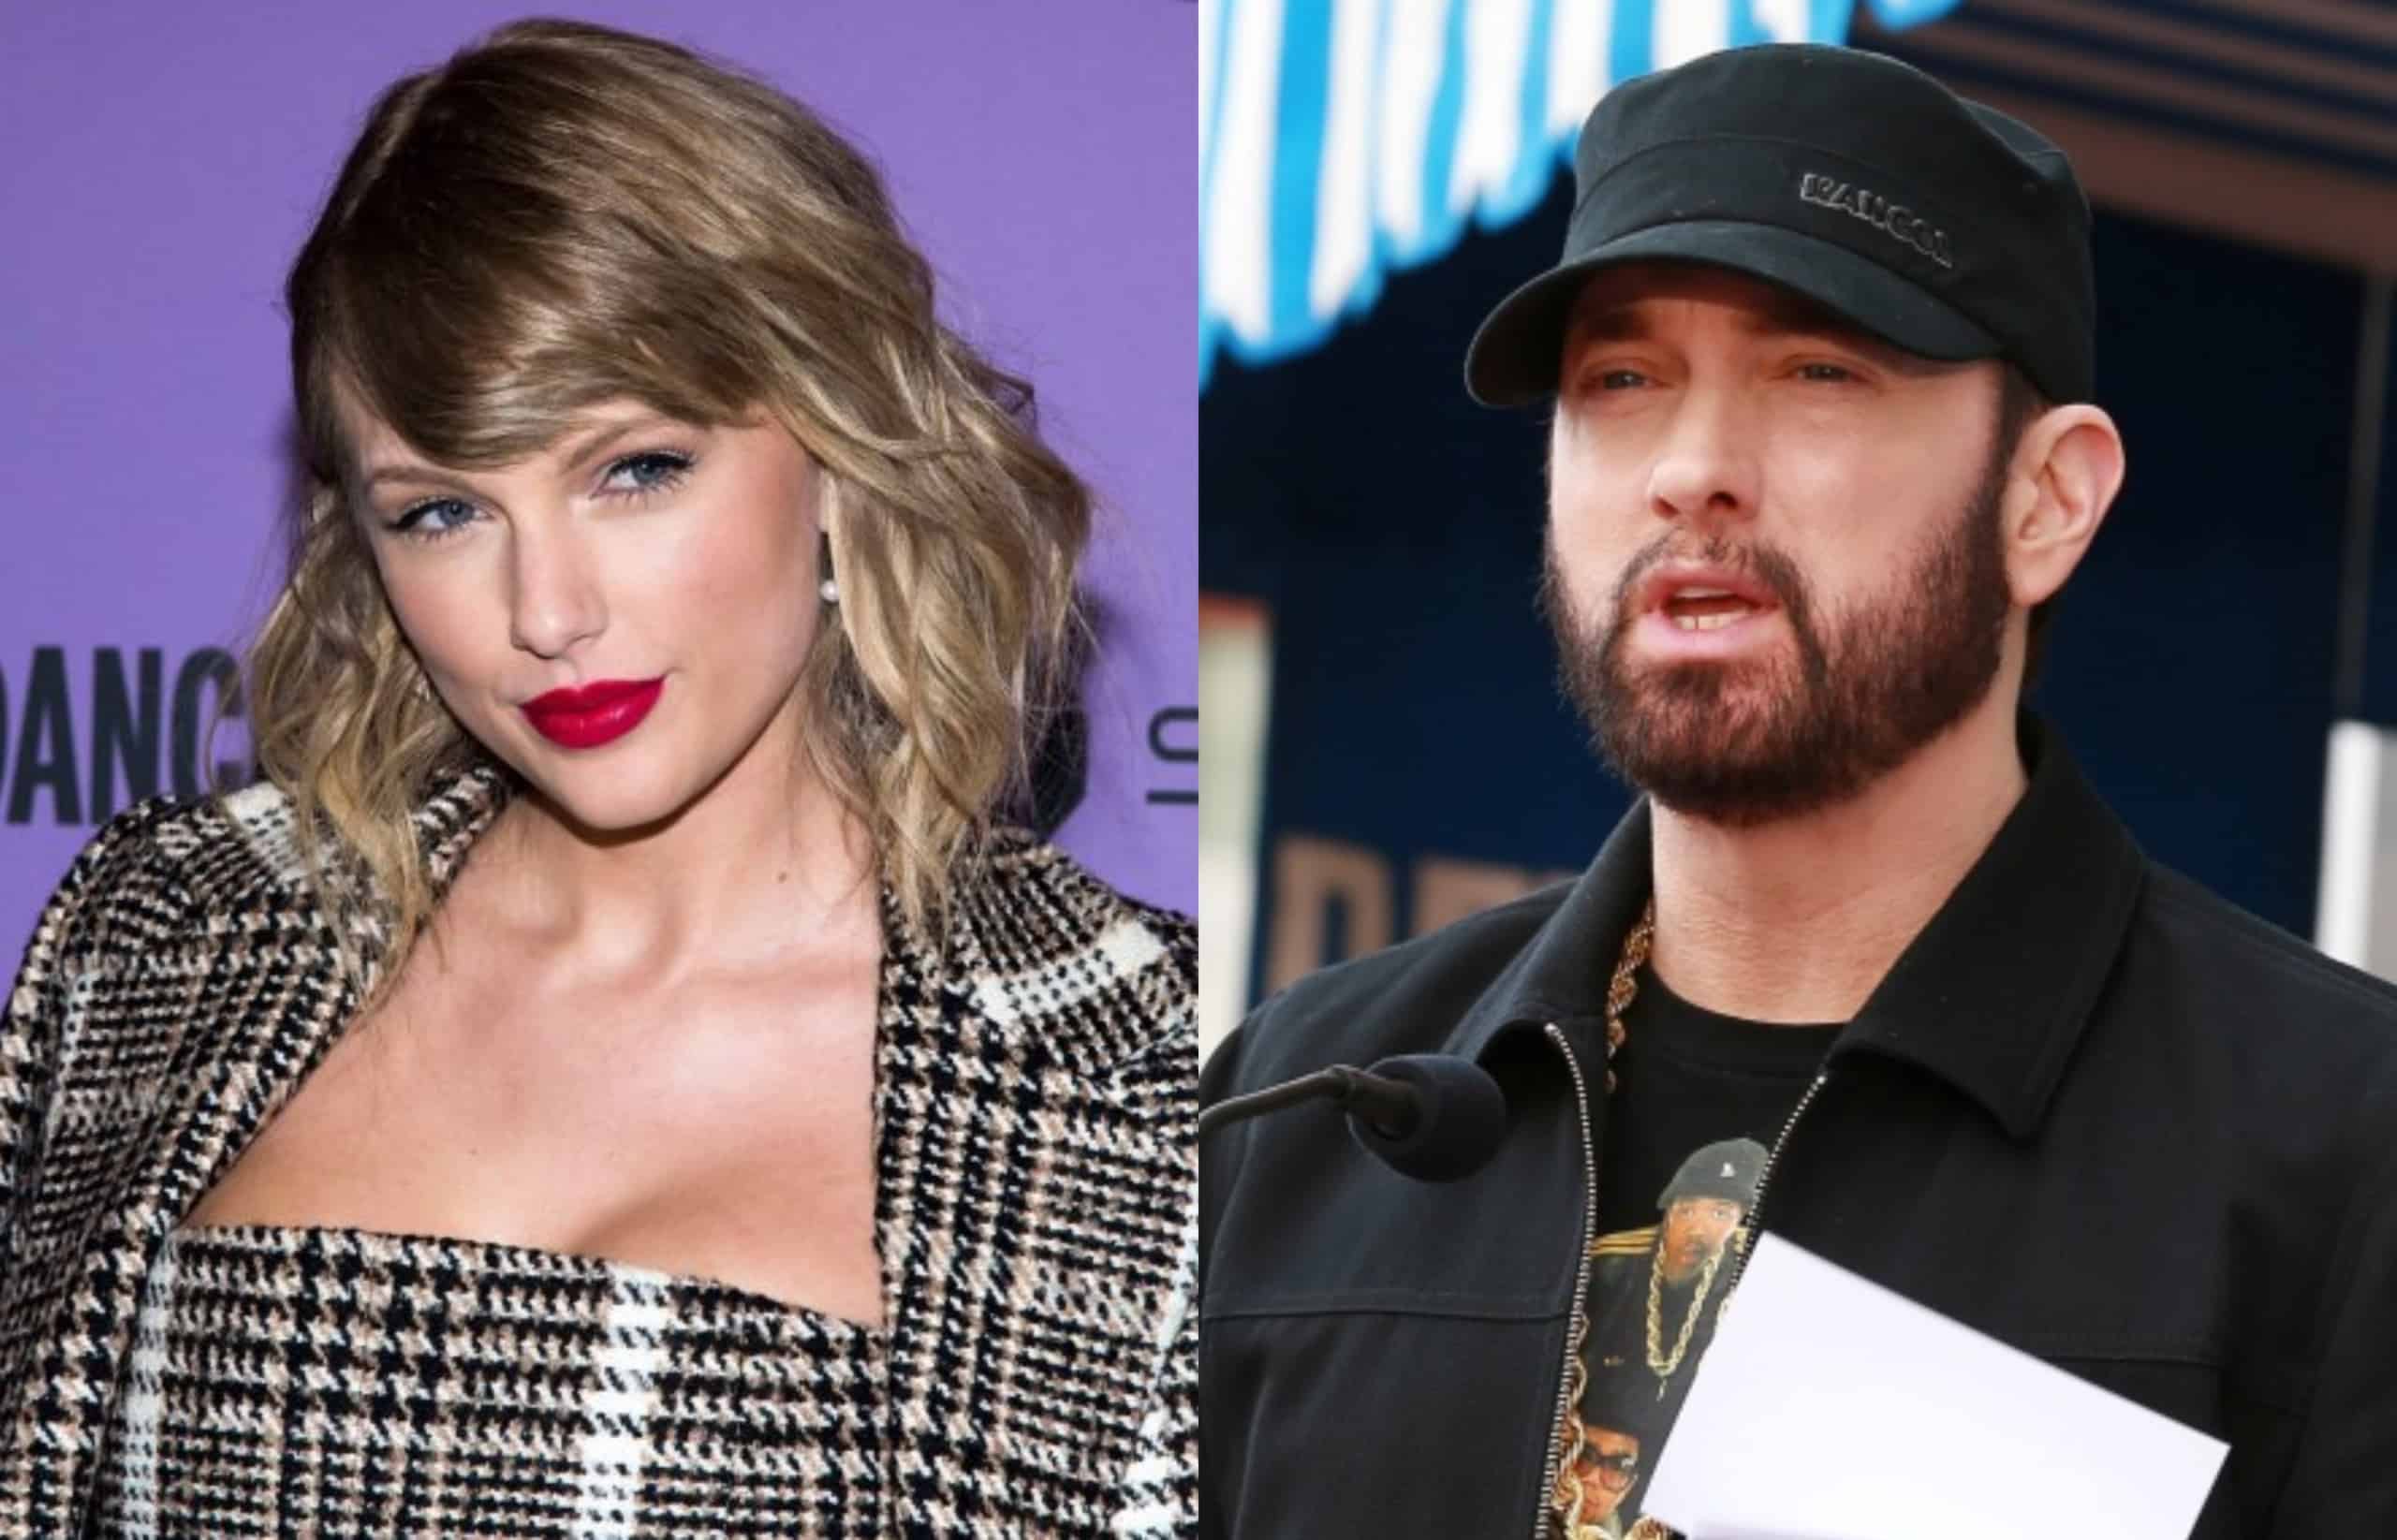 Taylor Swift's Folklore Did Biggest Billboard 200 Debut of 2020; Eminem is out of Top 5